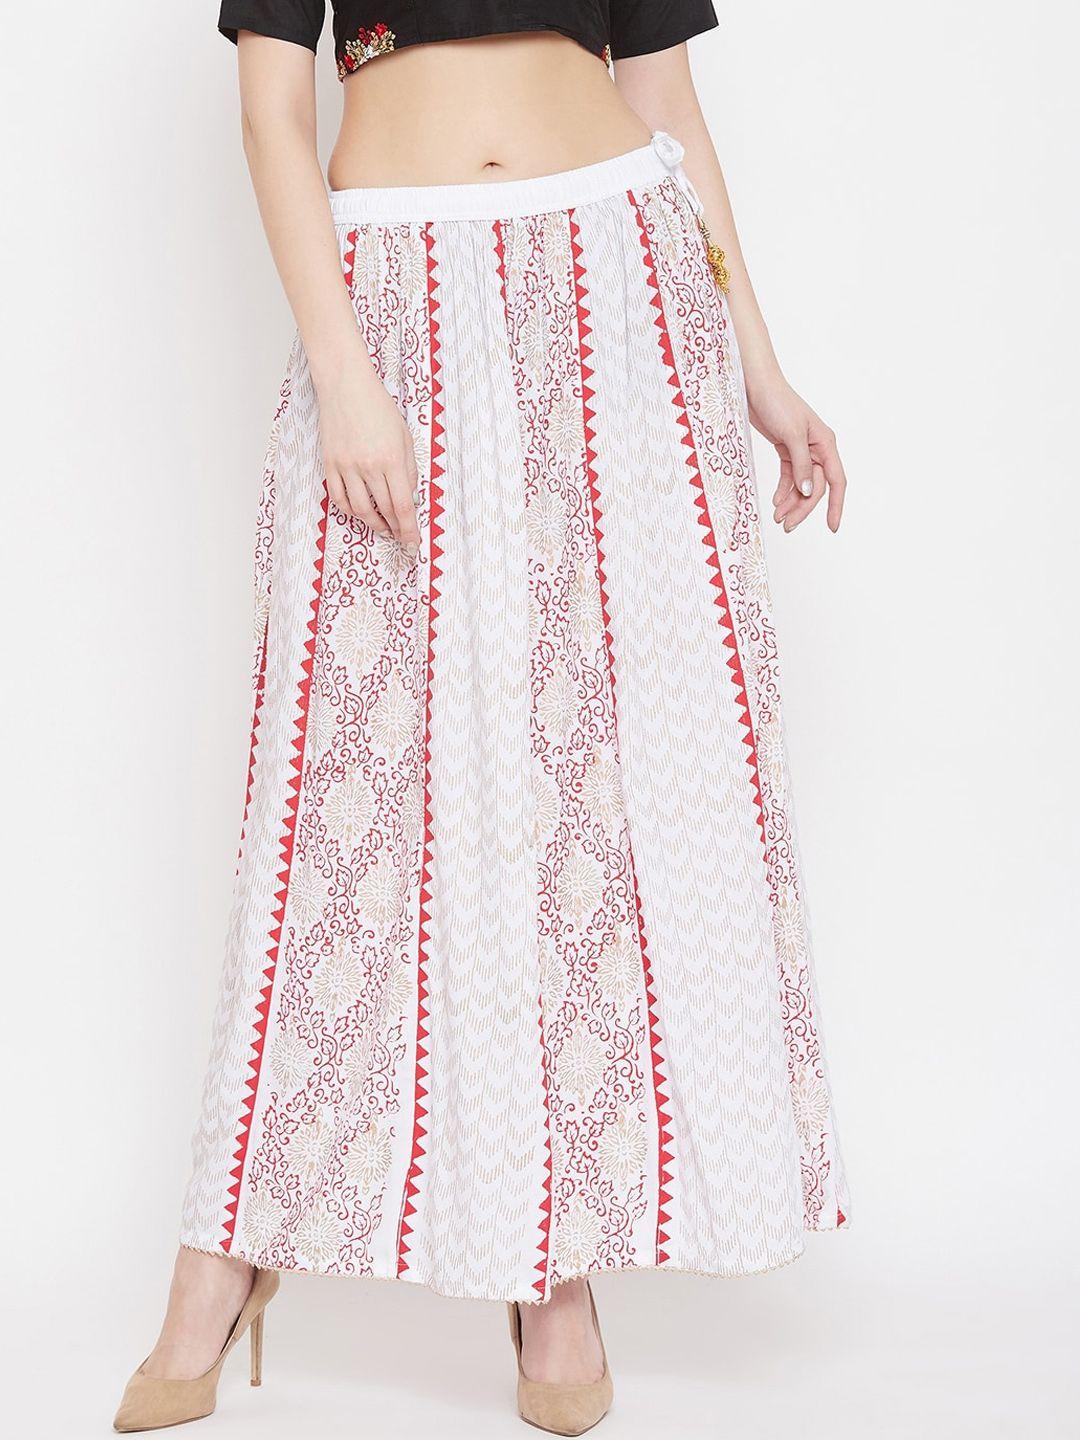 Clora Creation Women White & Red Printed Flared Maxi Skirt